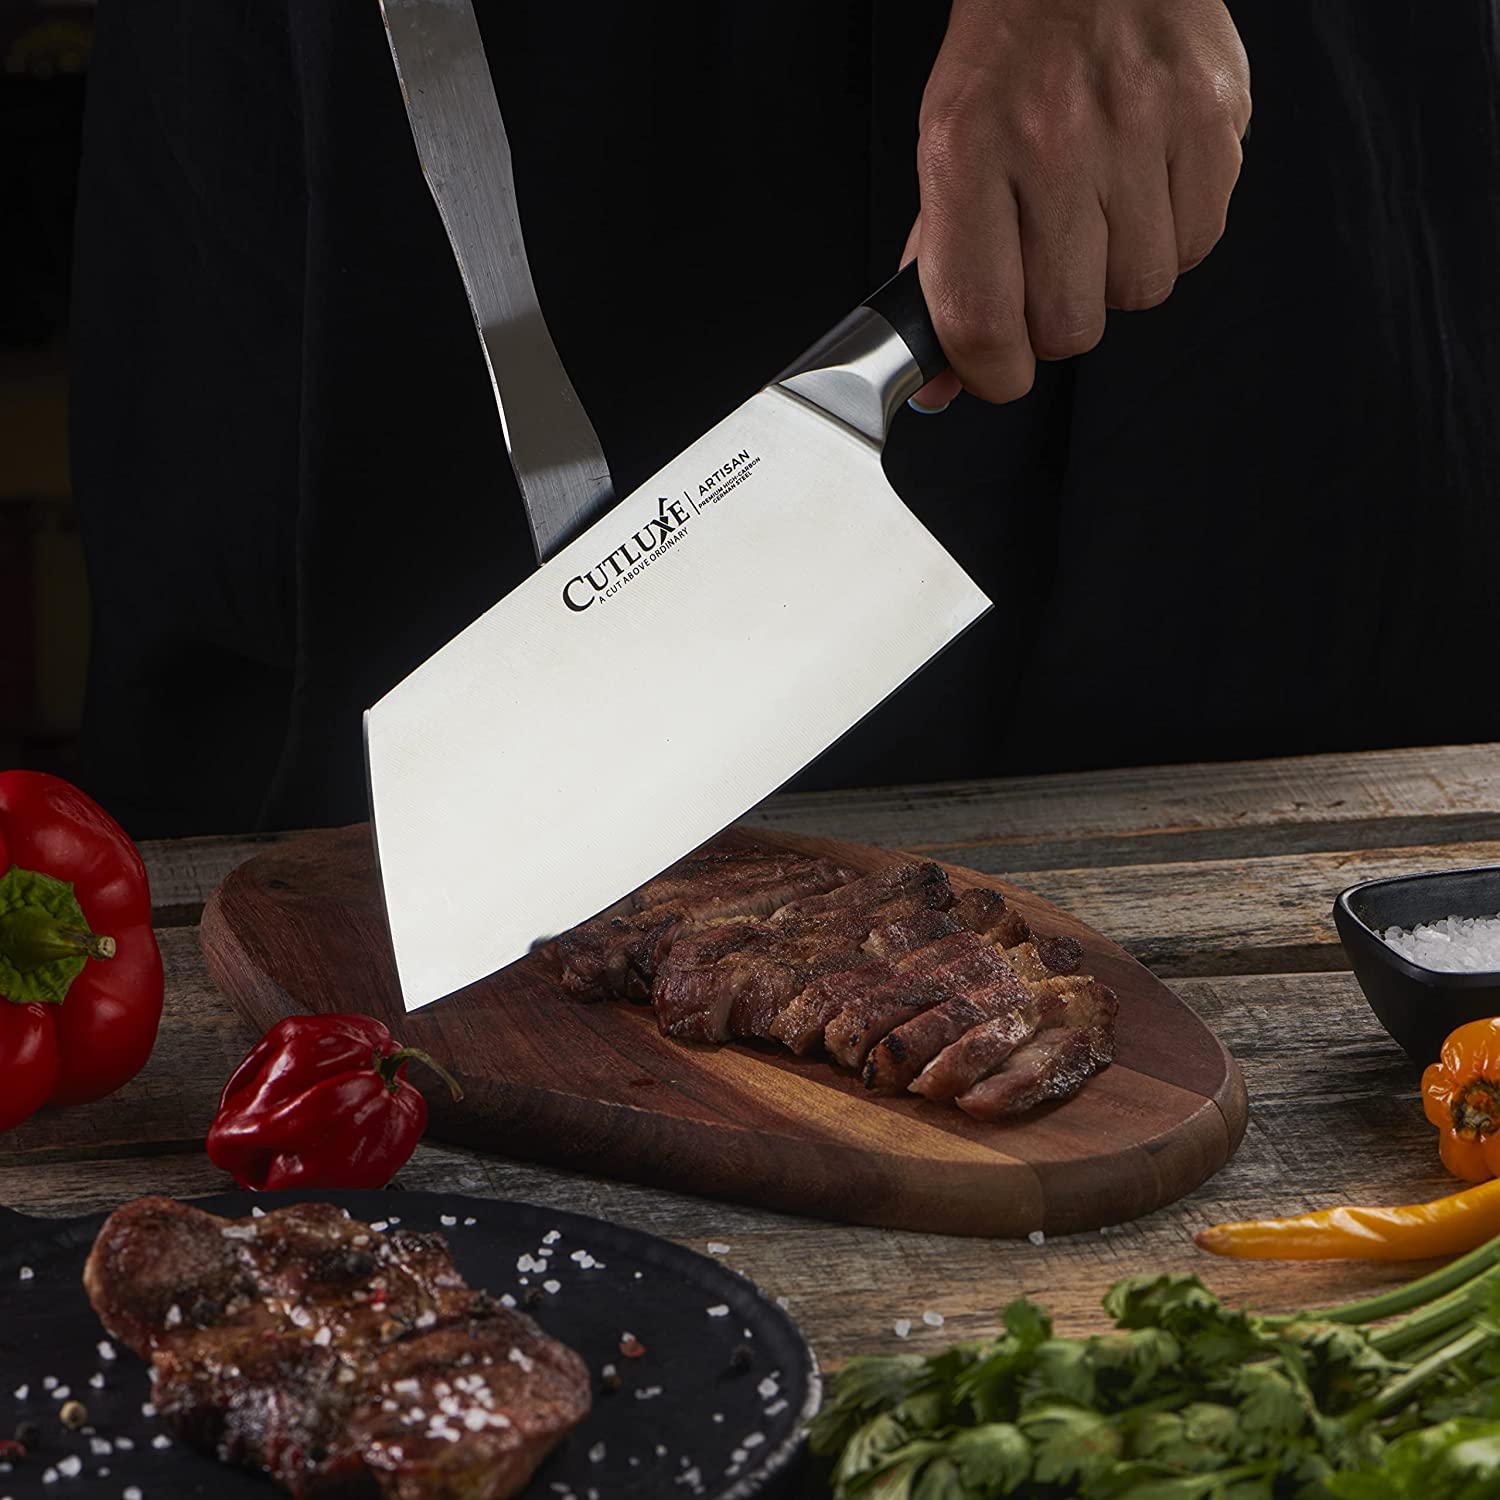 CUTLUXE 7 Cleaver Knife, Heavy Meat Cleaver Chopping Knife